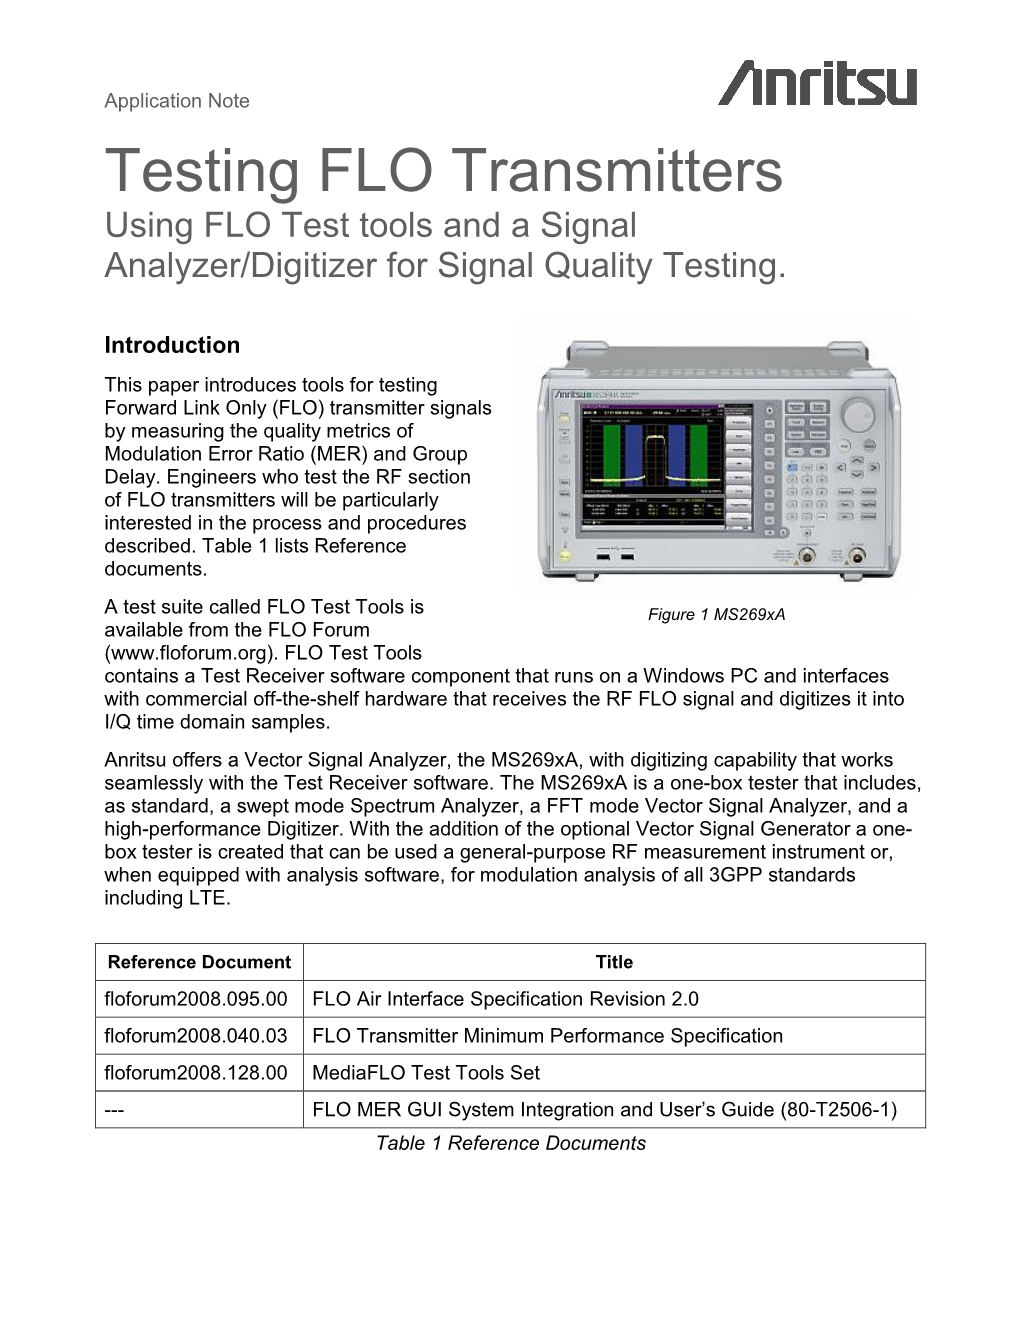 Testing FLO Transmitters Using FLO Test Tools and a Signal Analyzer/Digitizer for Signal Quality Testing